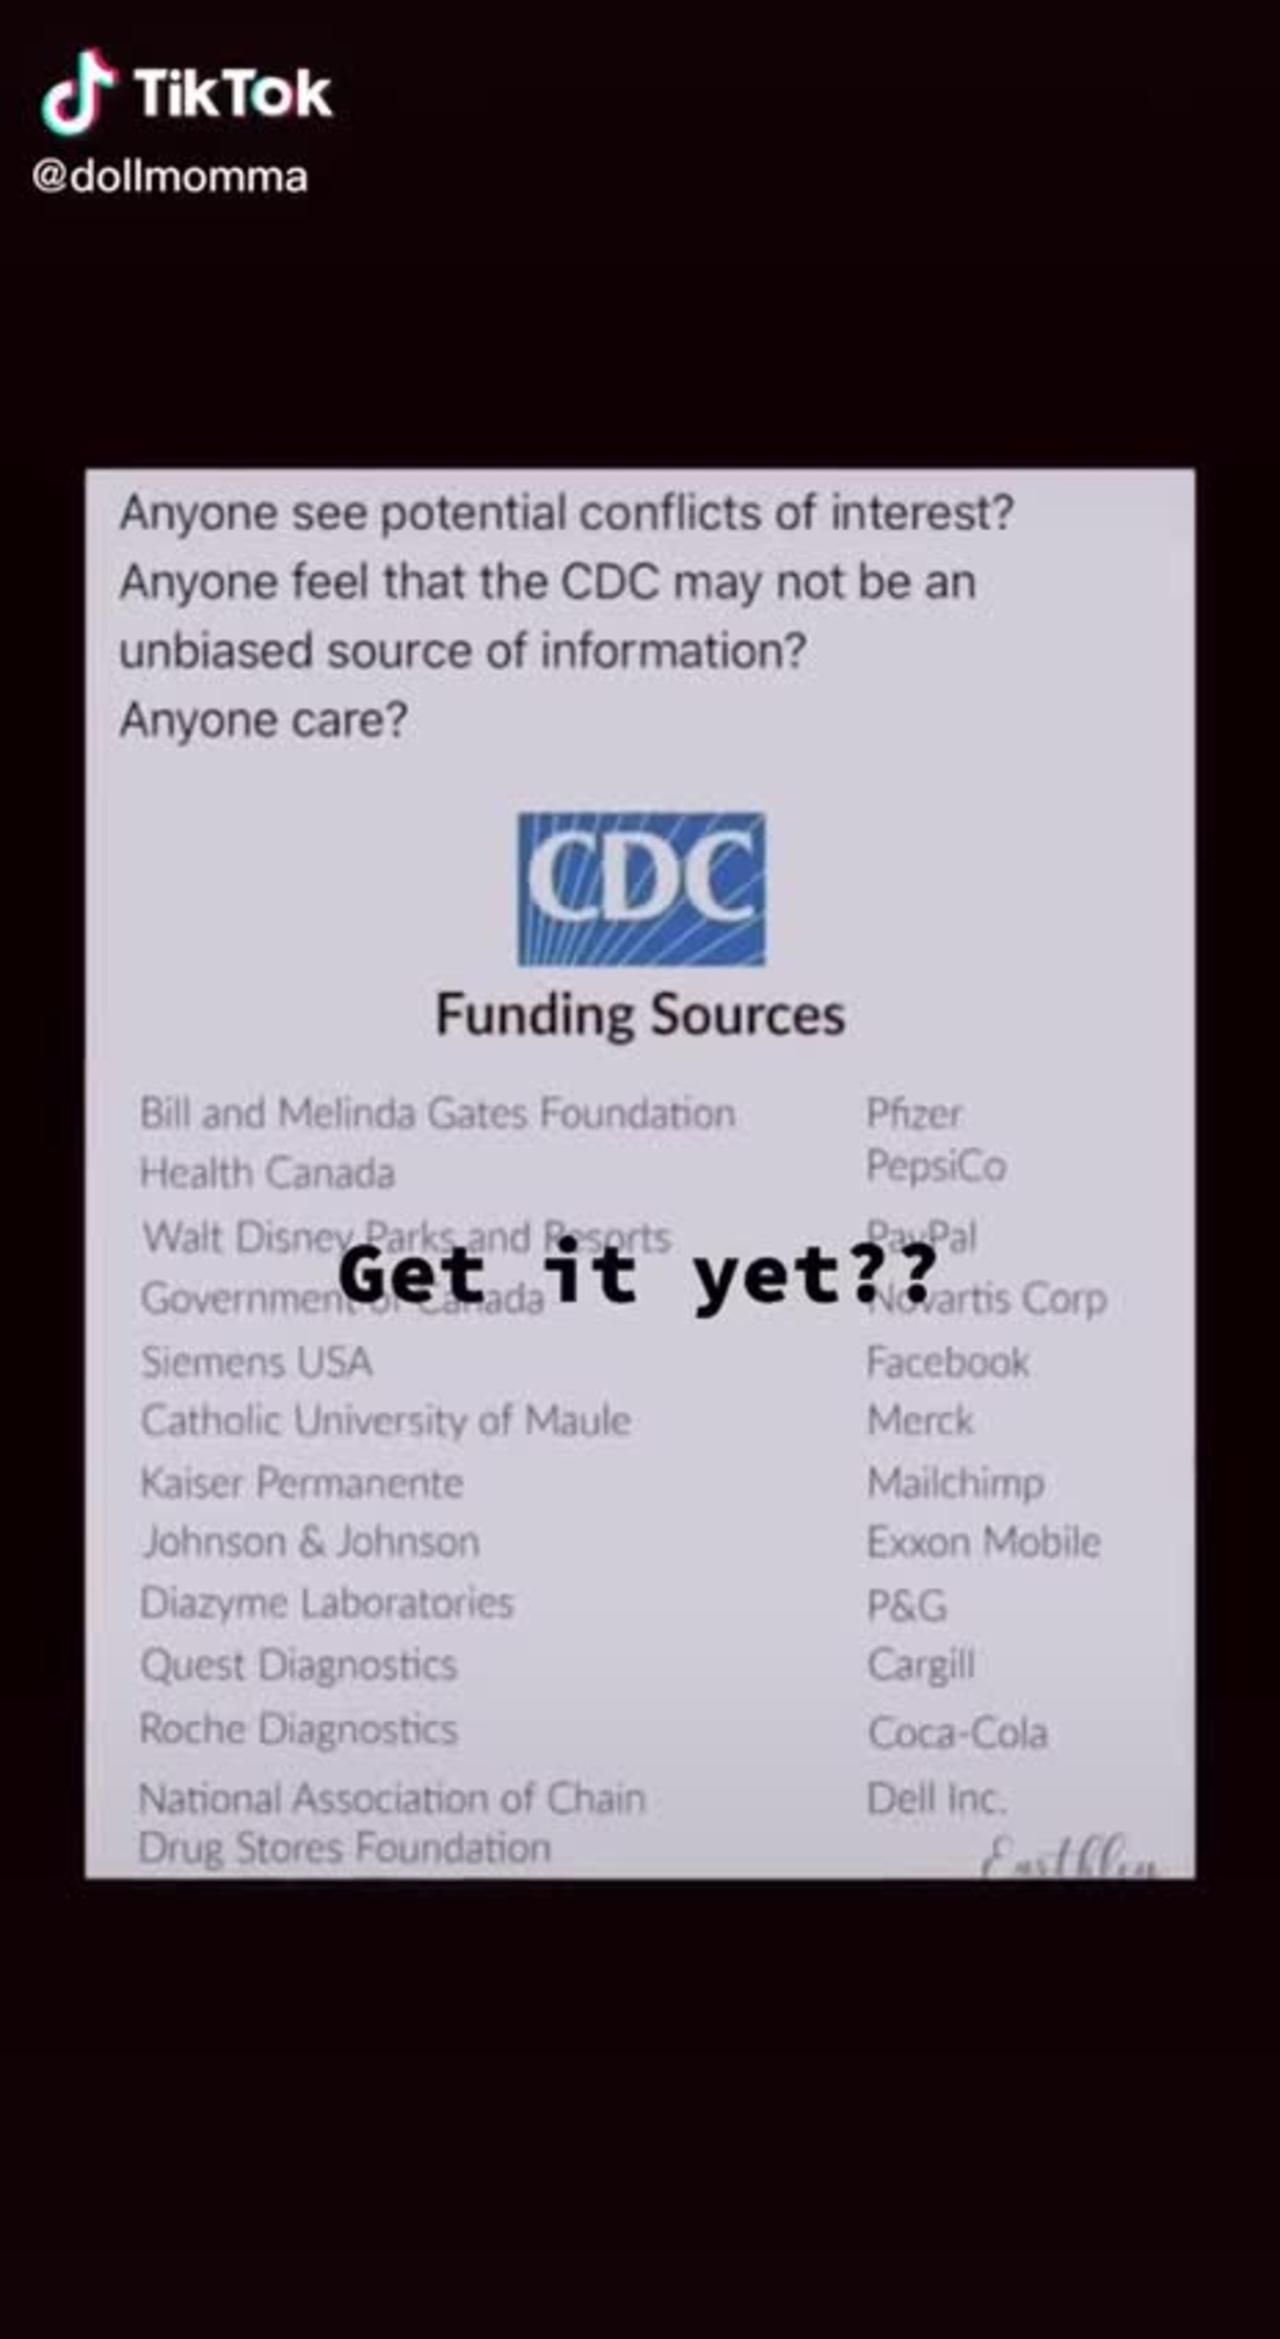 So who funds the CDC?